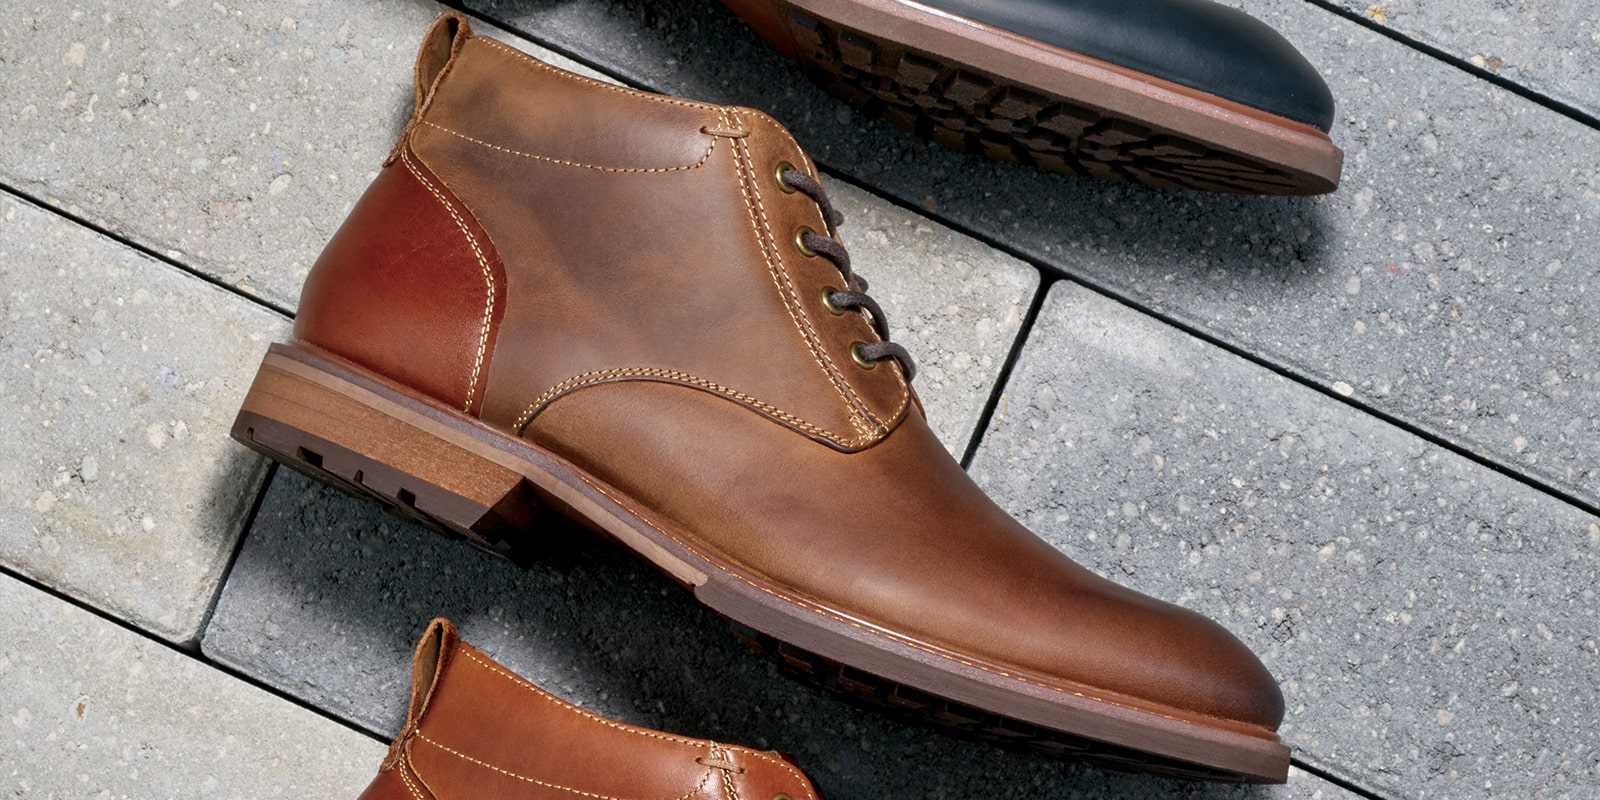 The featured image is the Lodge Plain Toe Chukka Boot in Brown Crazy Horse lying on cobblestones.